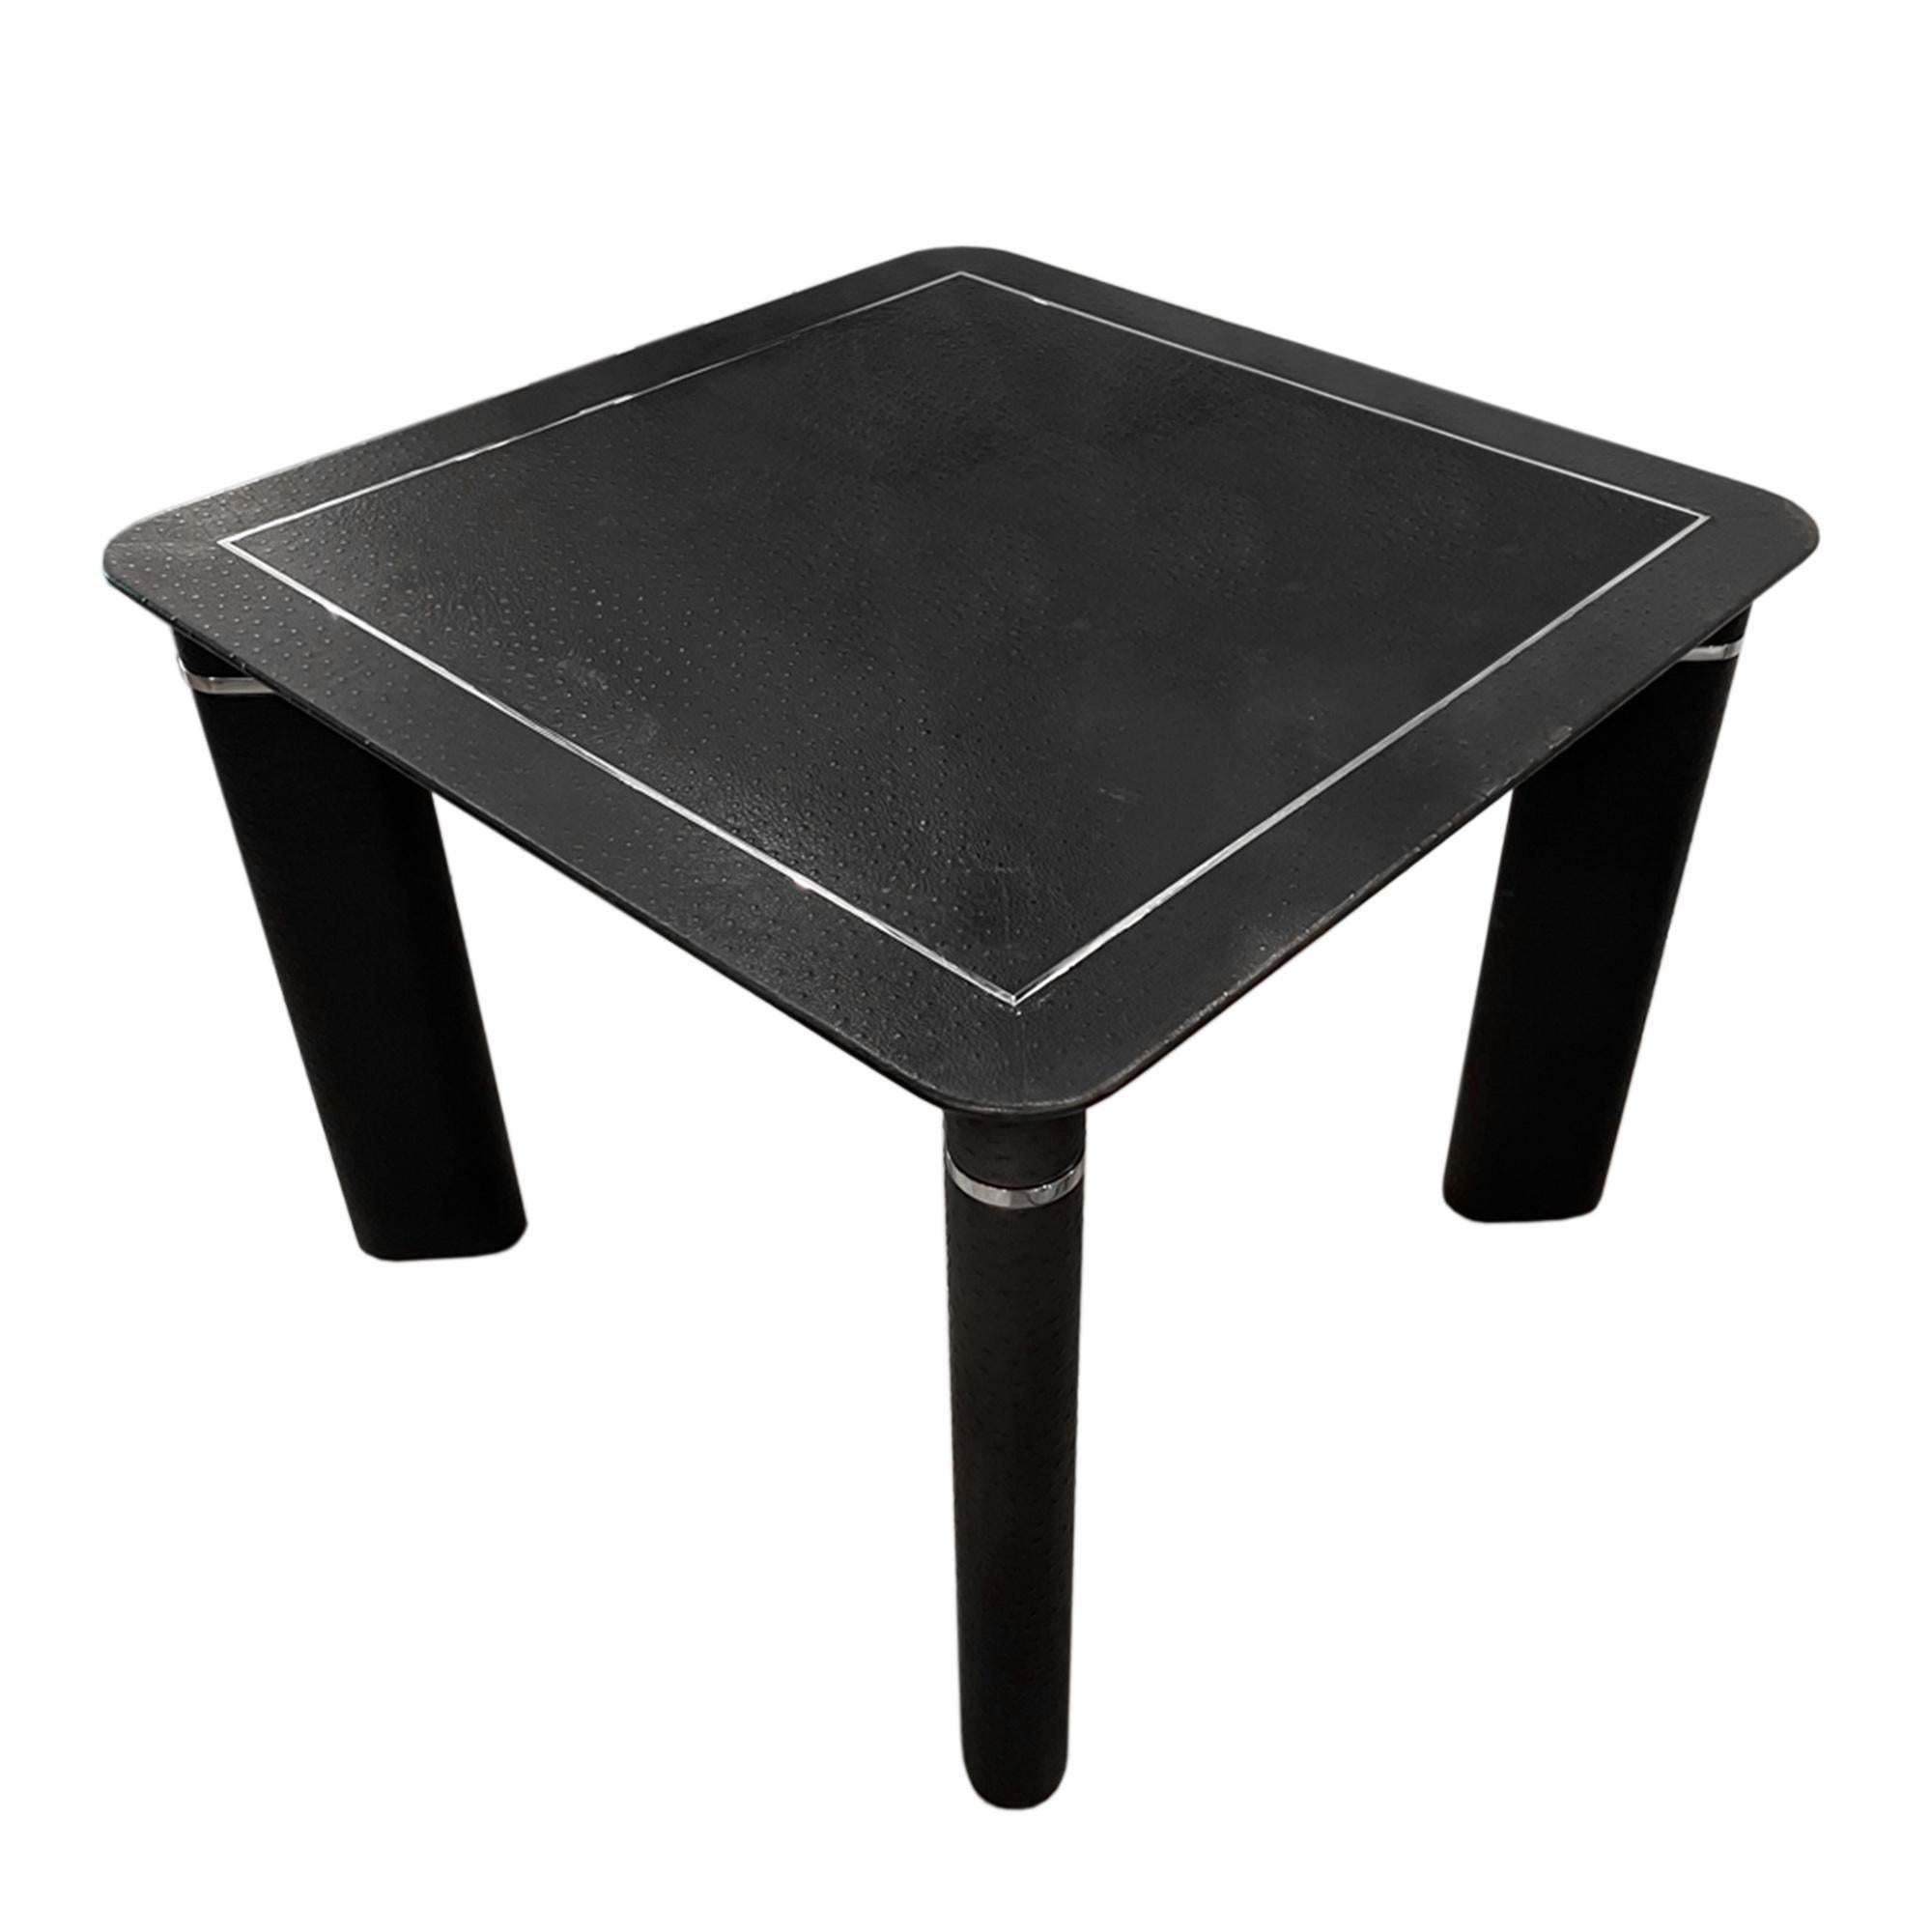 This super stylish card table was made in France in the 1970s.

Covered ostrich skin with chrome trim and retractable drinks holders. 

Perfect for games' nights and parties!